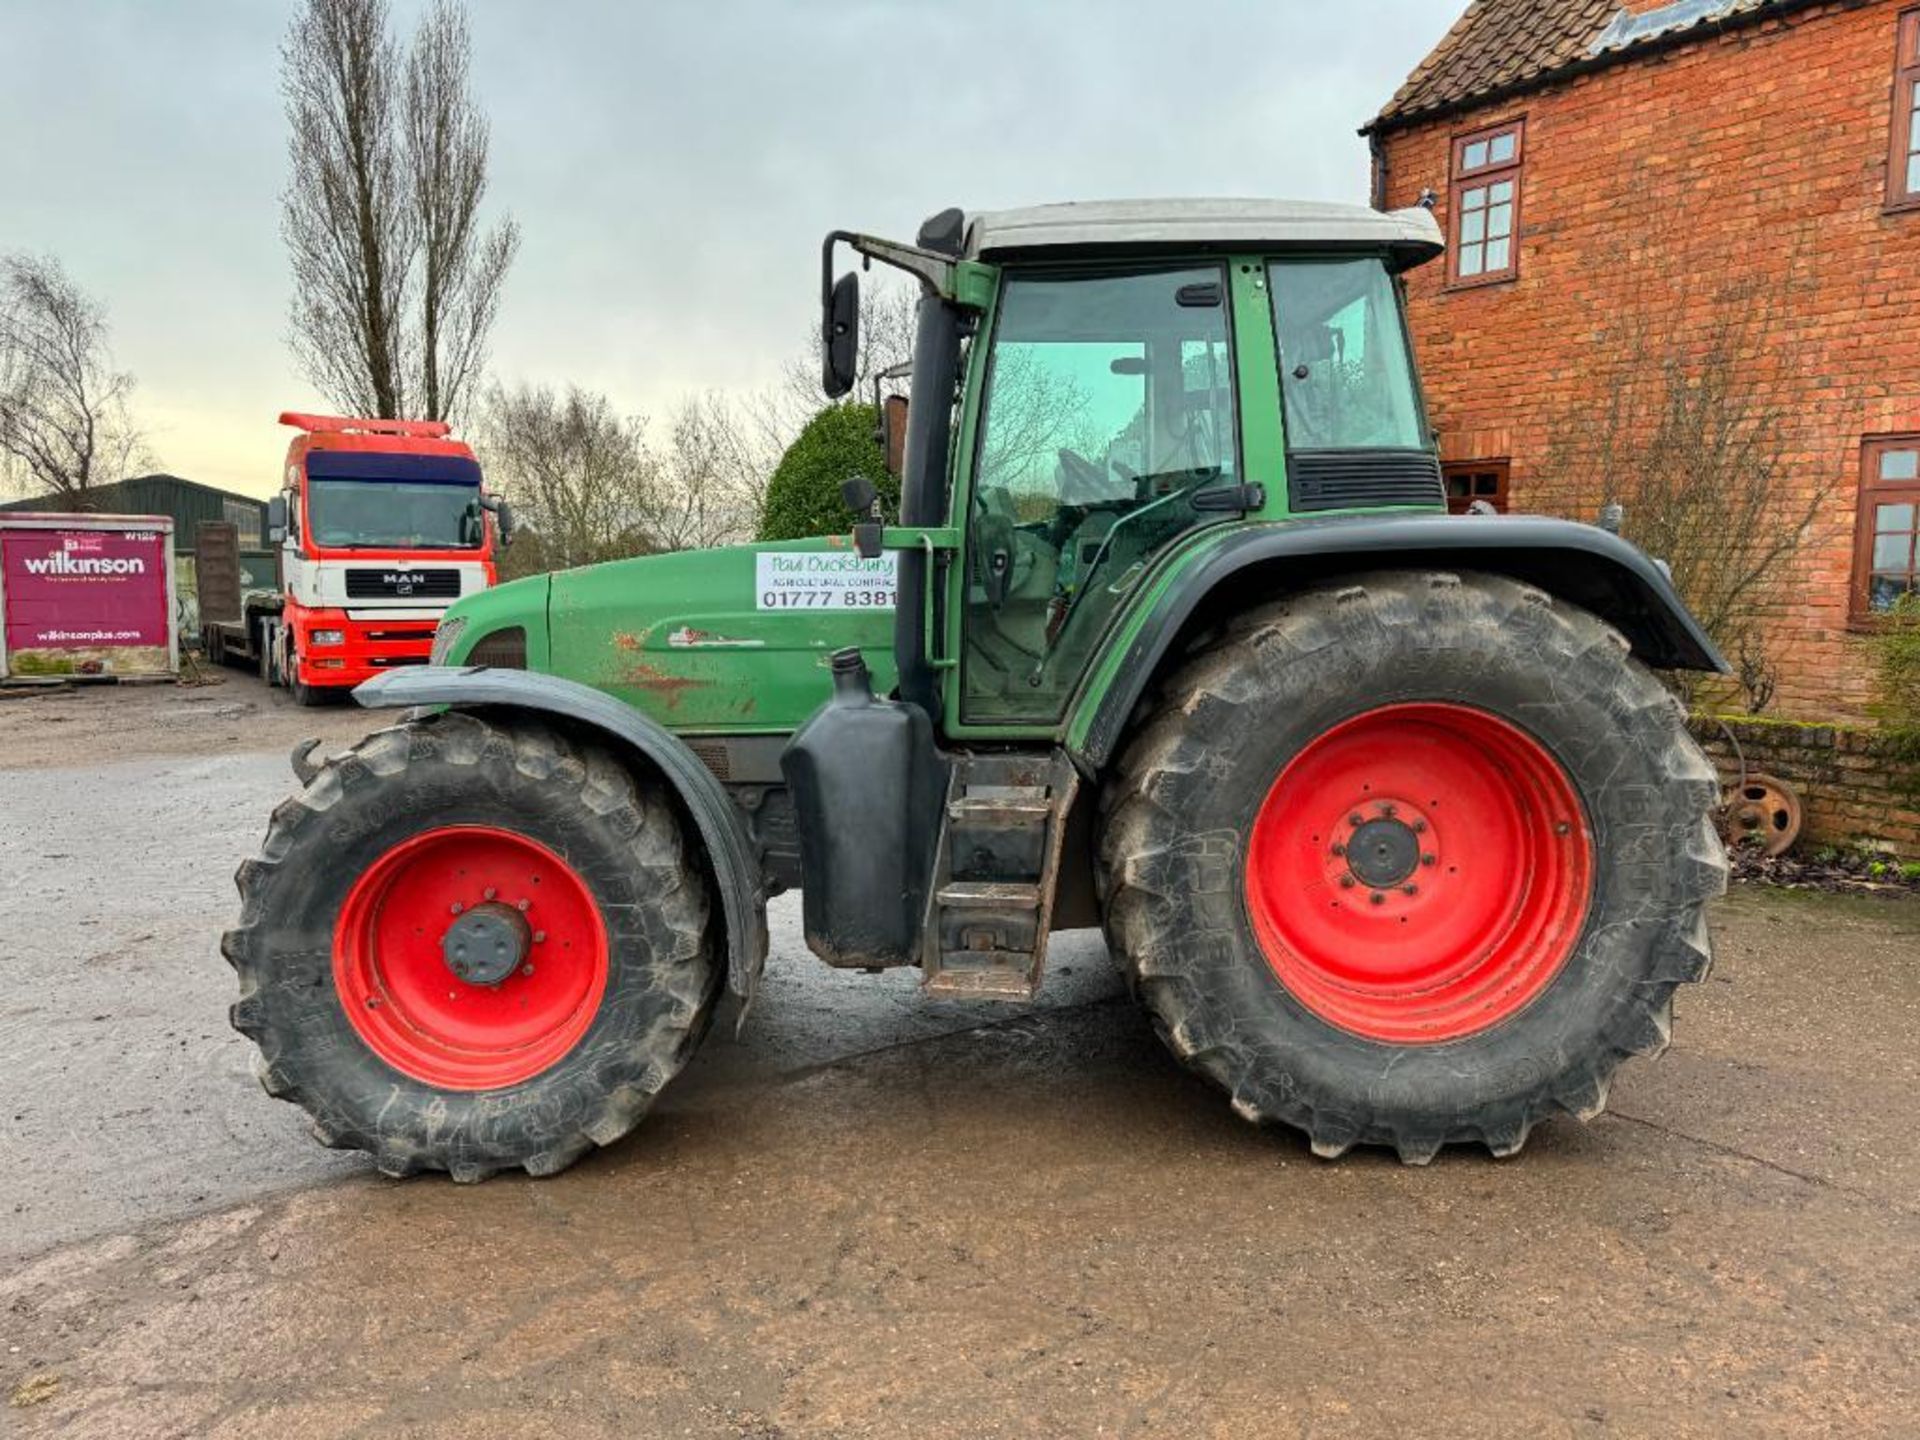 2001 Fendt 716 Vario 50kph 4wd tractor with 4 electric spools, air brakes and front linkage on BKT 5 - Image 9 of 22